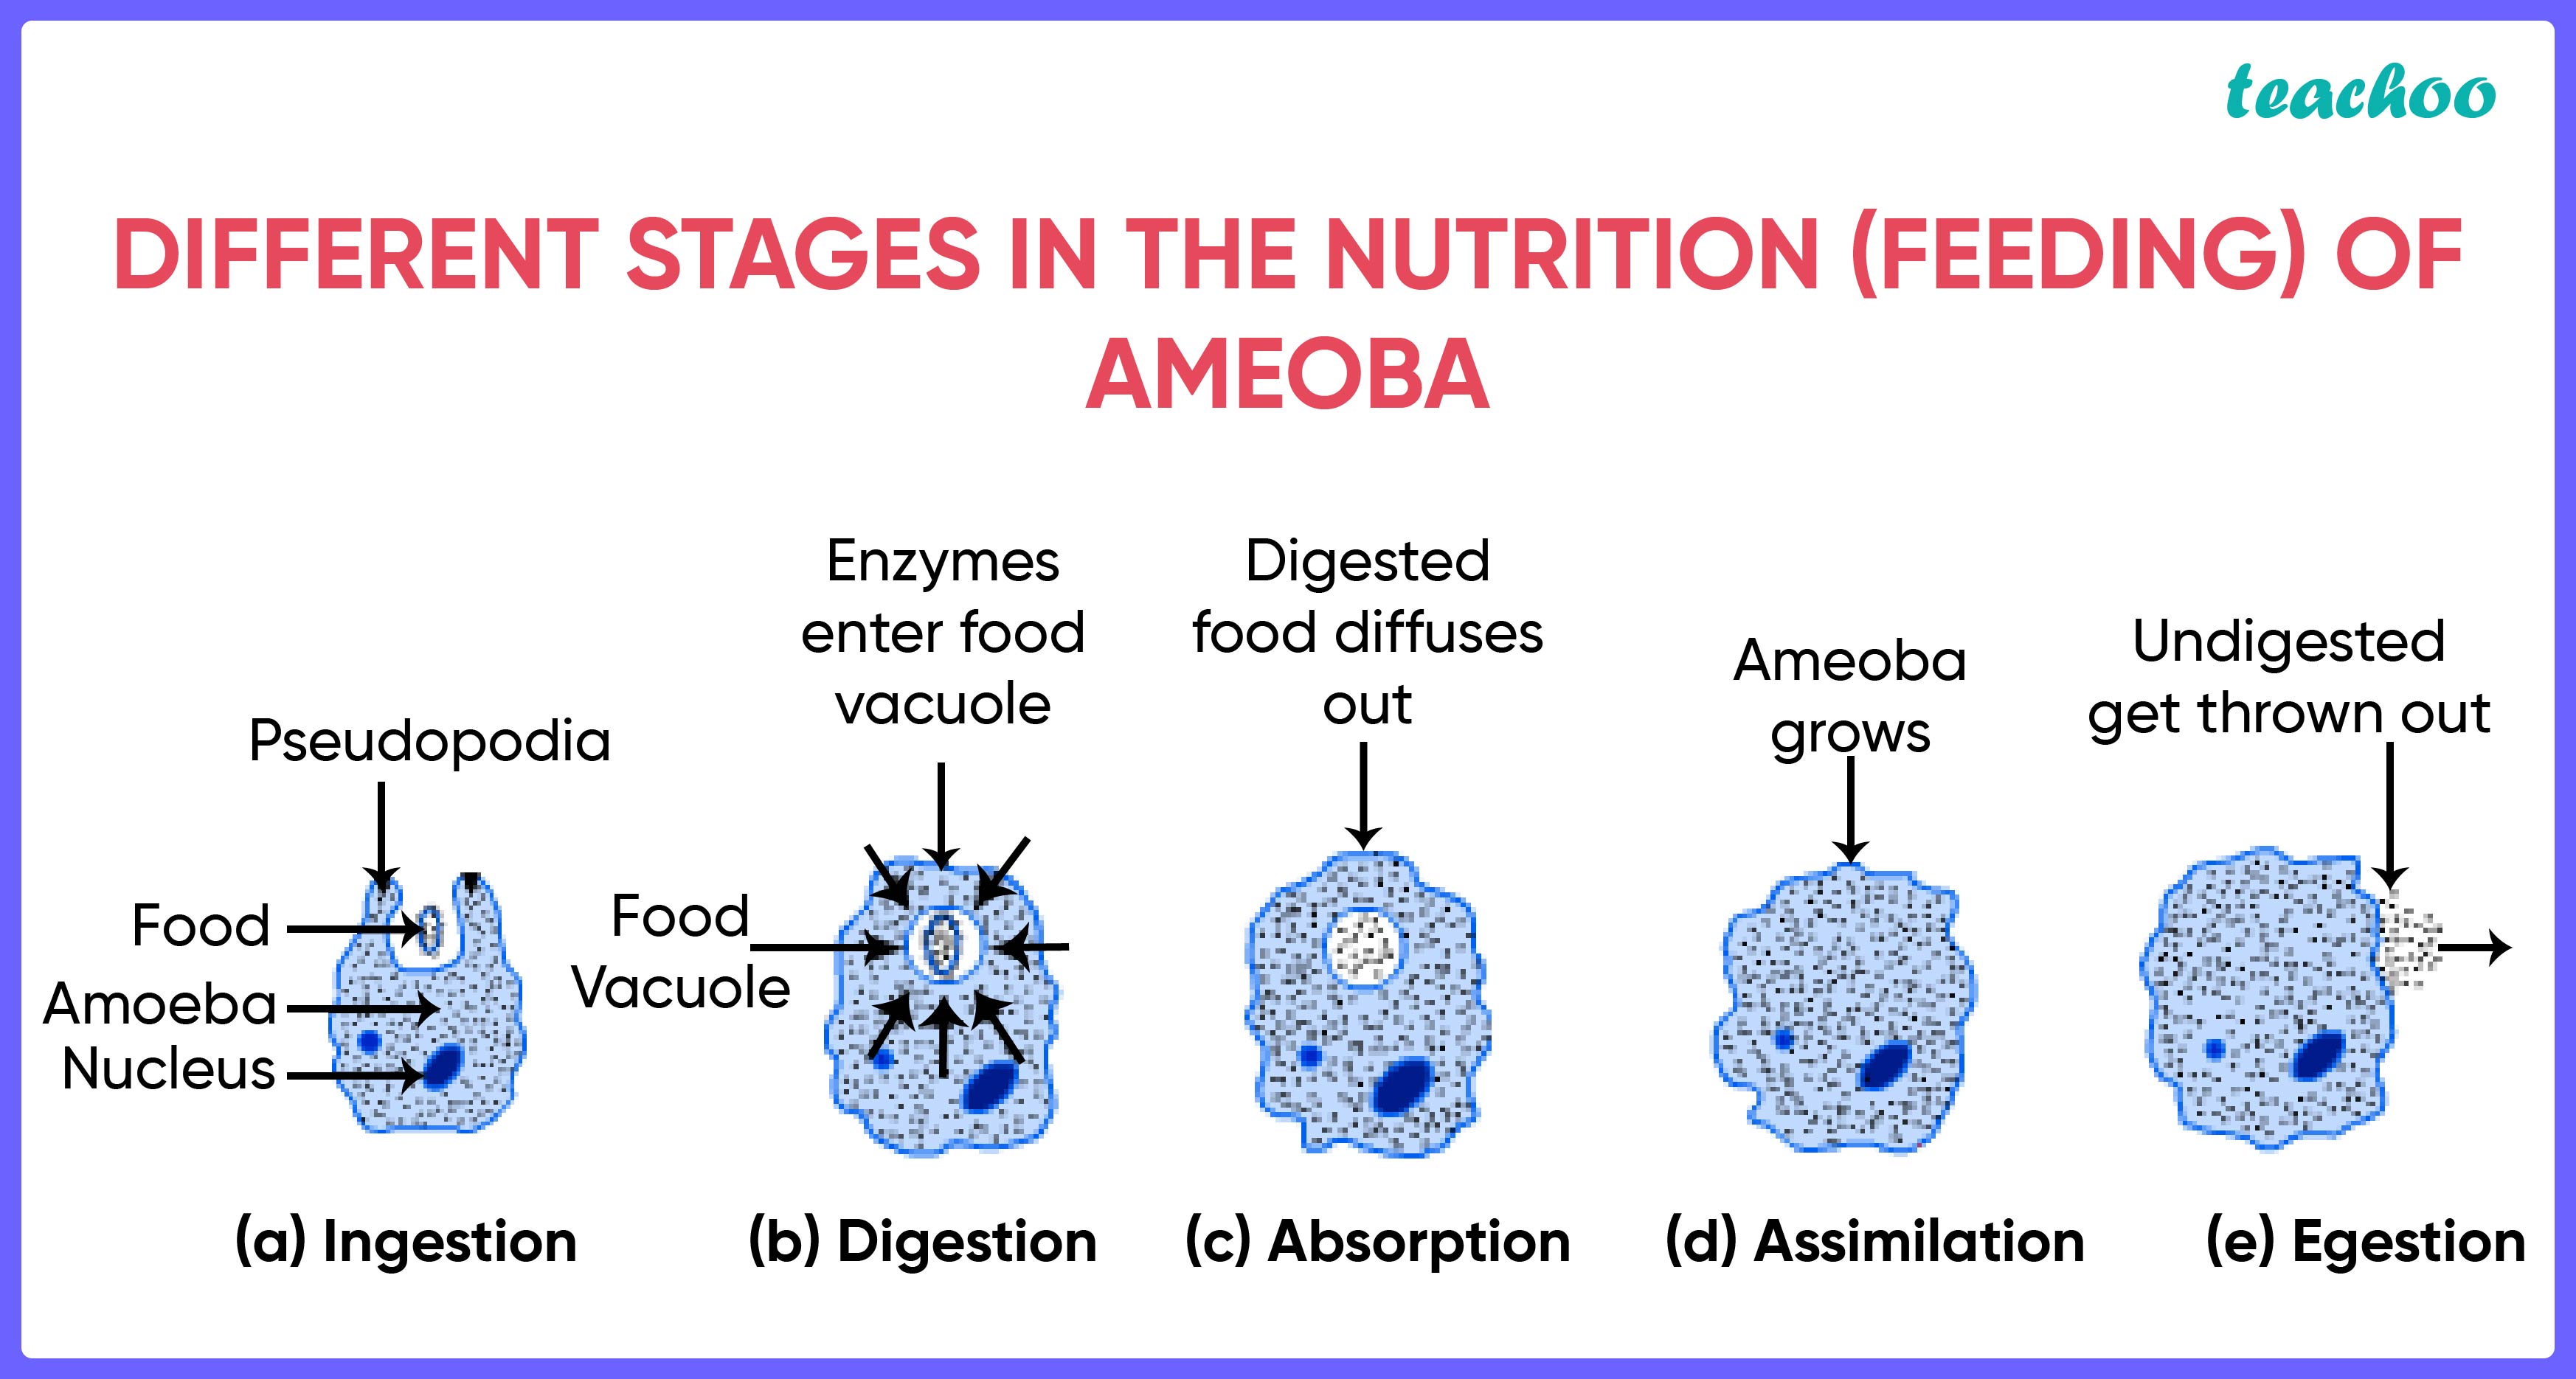 Different stages in the nutrition (feeding) of Amoeba - Teachoo.jpg